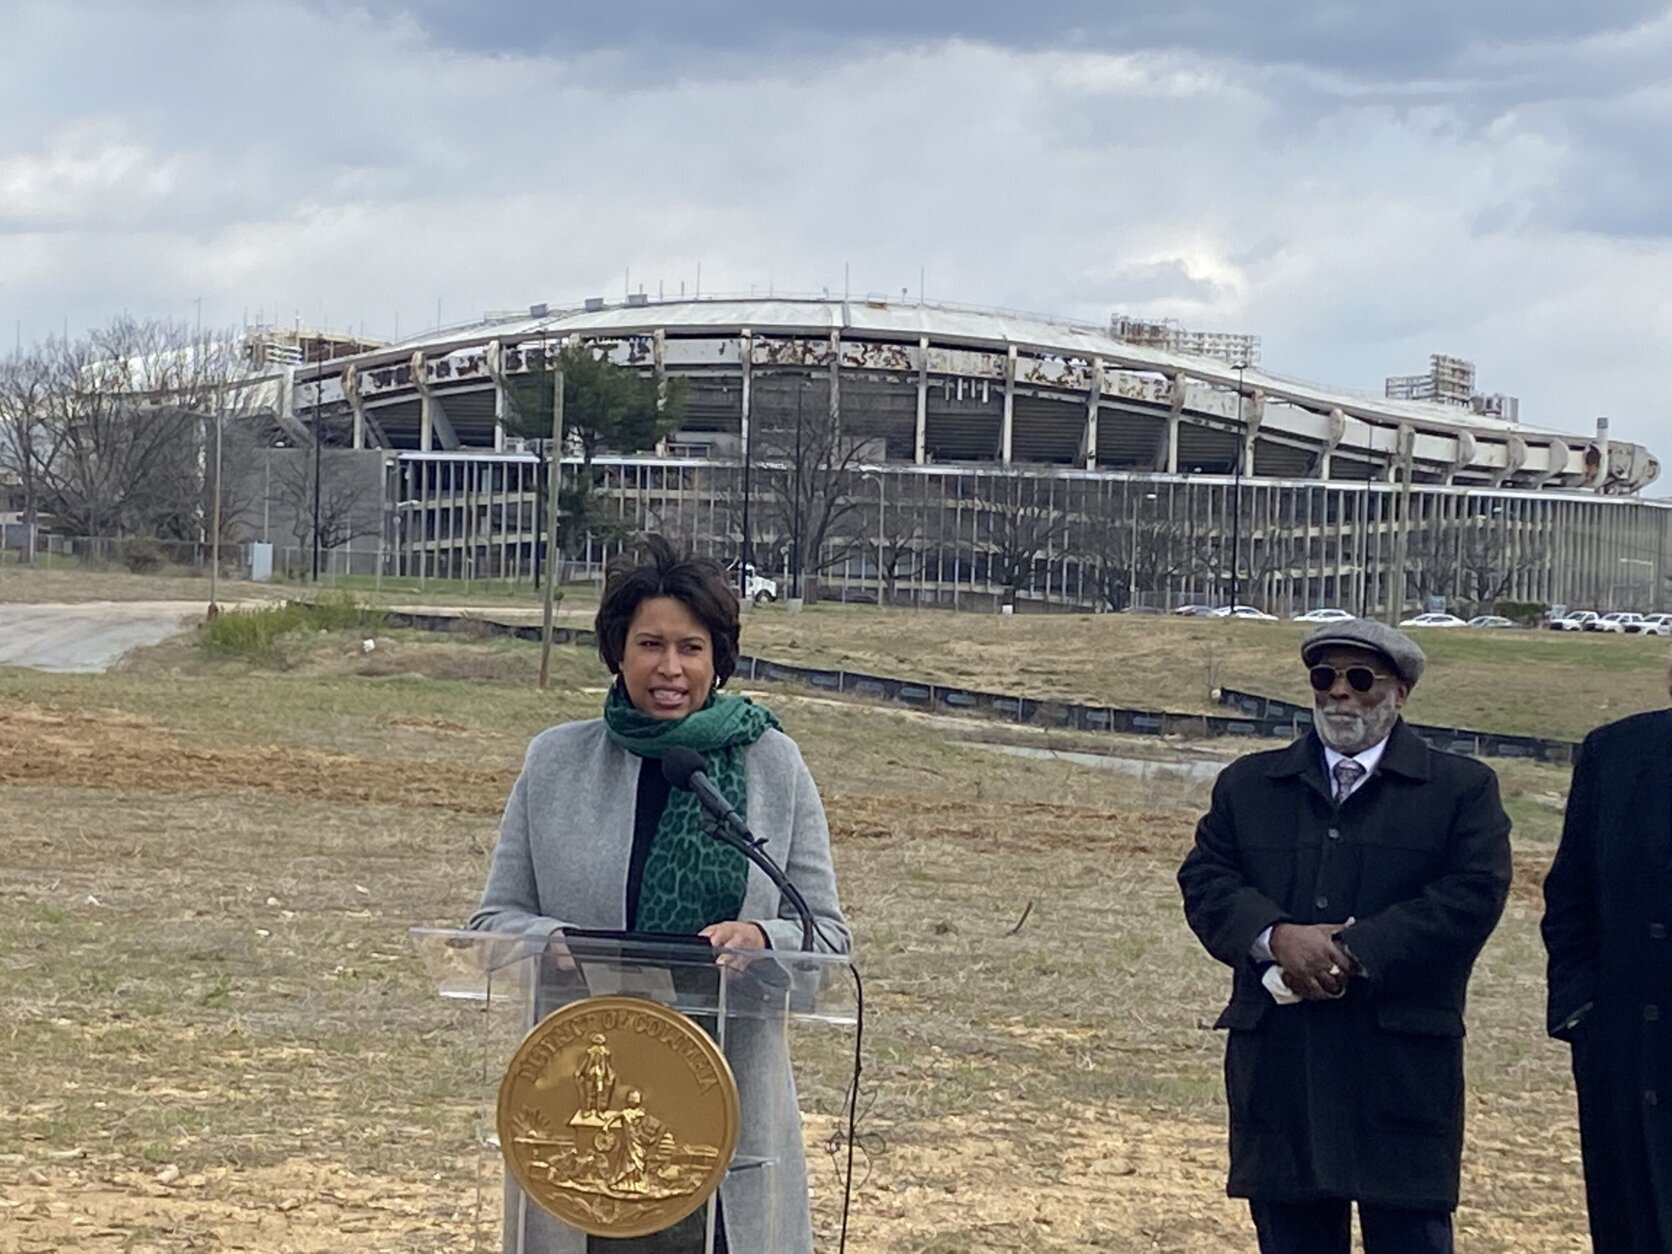 DC envisions new sportsplex at RFK Stadium site, with or without